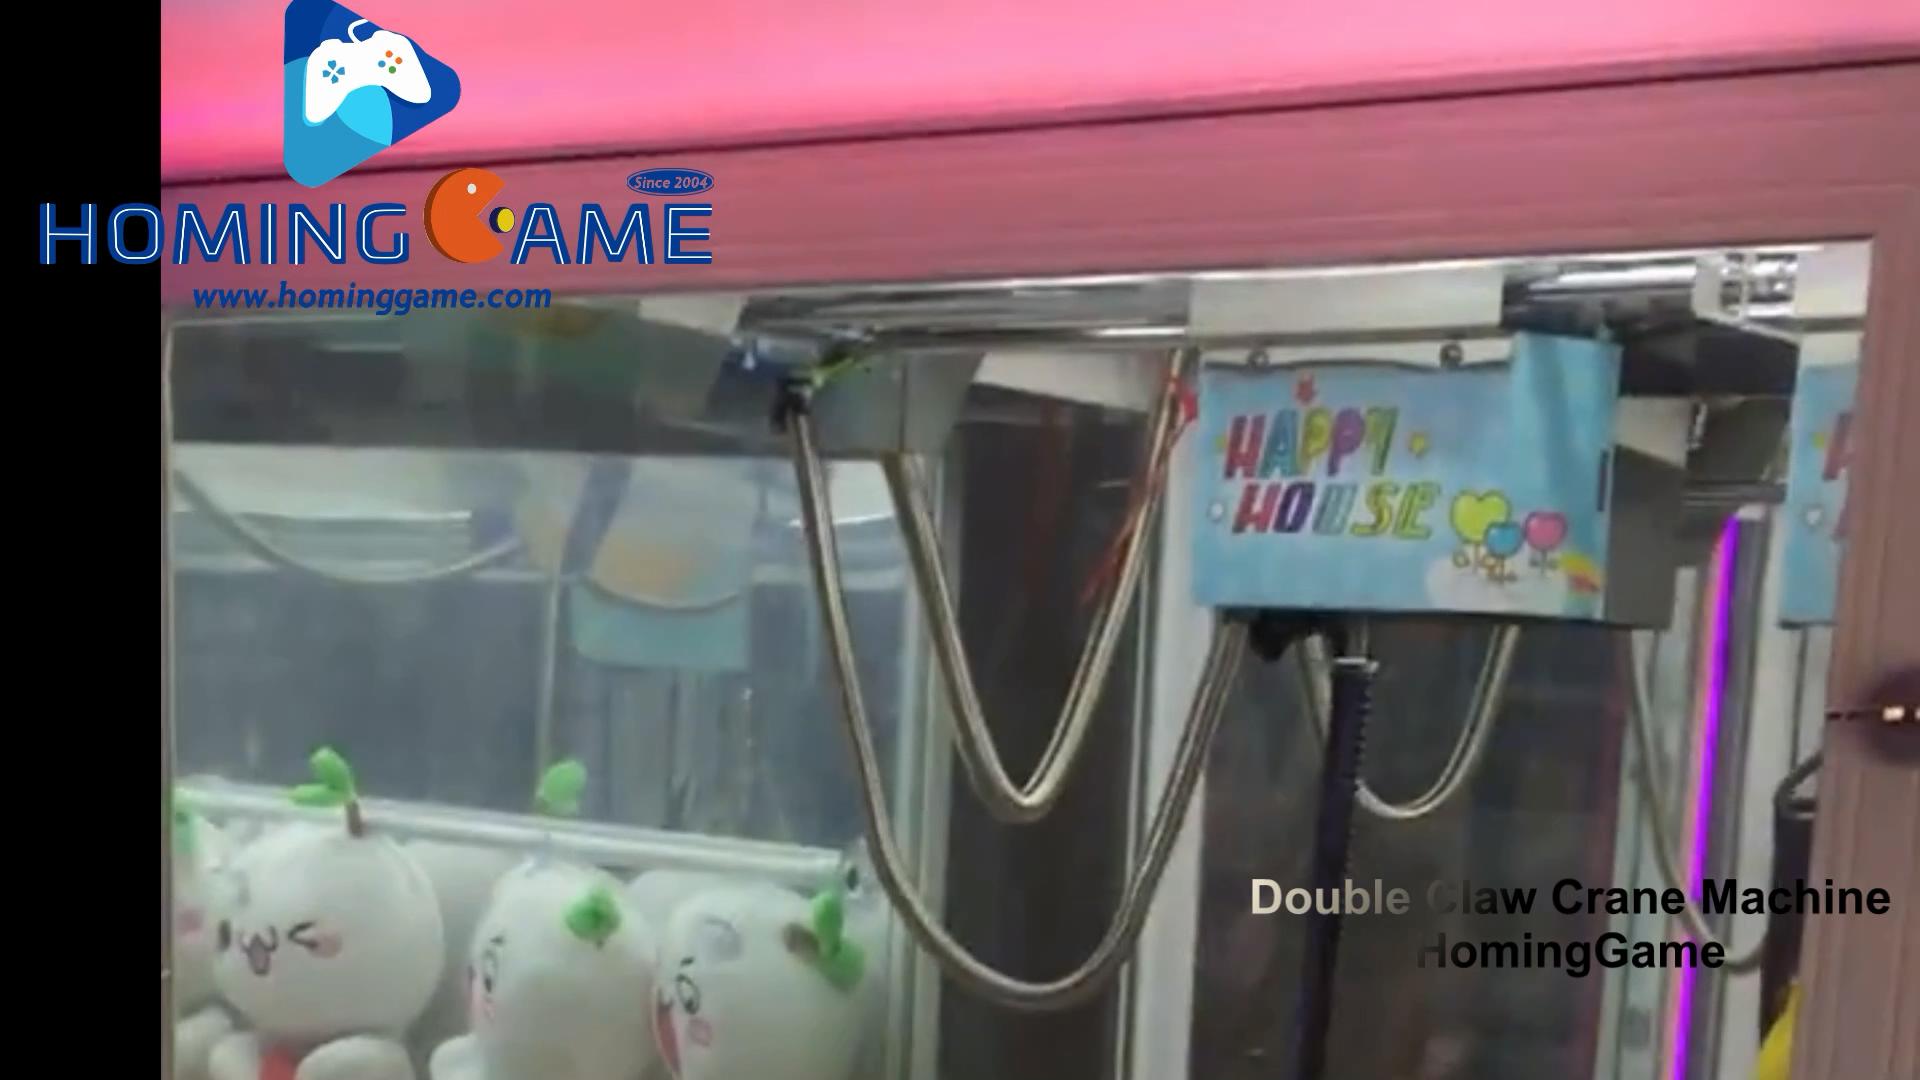 double claw crane machine,double claw crane game machine,double claw crane game machine,double claw prize game,claw machine,happy house crane machine,happy house claw machine,game machine,game machine price,game machine for sale,game machine supplier,game machine manufacturer,toy story crane machine,game+machine,toy+story+crane+machine,crane+machine,claw machine,claw prize machine,claw game machine,prize vending machine,vending machine,luxury crane machine,luxury led crane machine,game machines,arcade game machine,coin operated game machine,indoor game machine,electrical game machine,amusement machine,amusement park game equipment,game equipment,slot game machine,vending game,prize vending game machine,redemption game machine,key master game machine,barber cut prize game machine,winner cube prize game machine,key push prize game machine,hominggame,www.gametube.hk,gametube.hk,entertainment game machine,amusement park game equipments,catch plush prize game machine,catcher crane machine,coin operated crane machine,coin operated claw machine